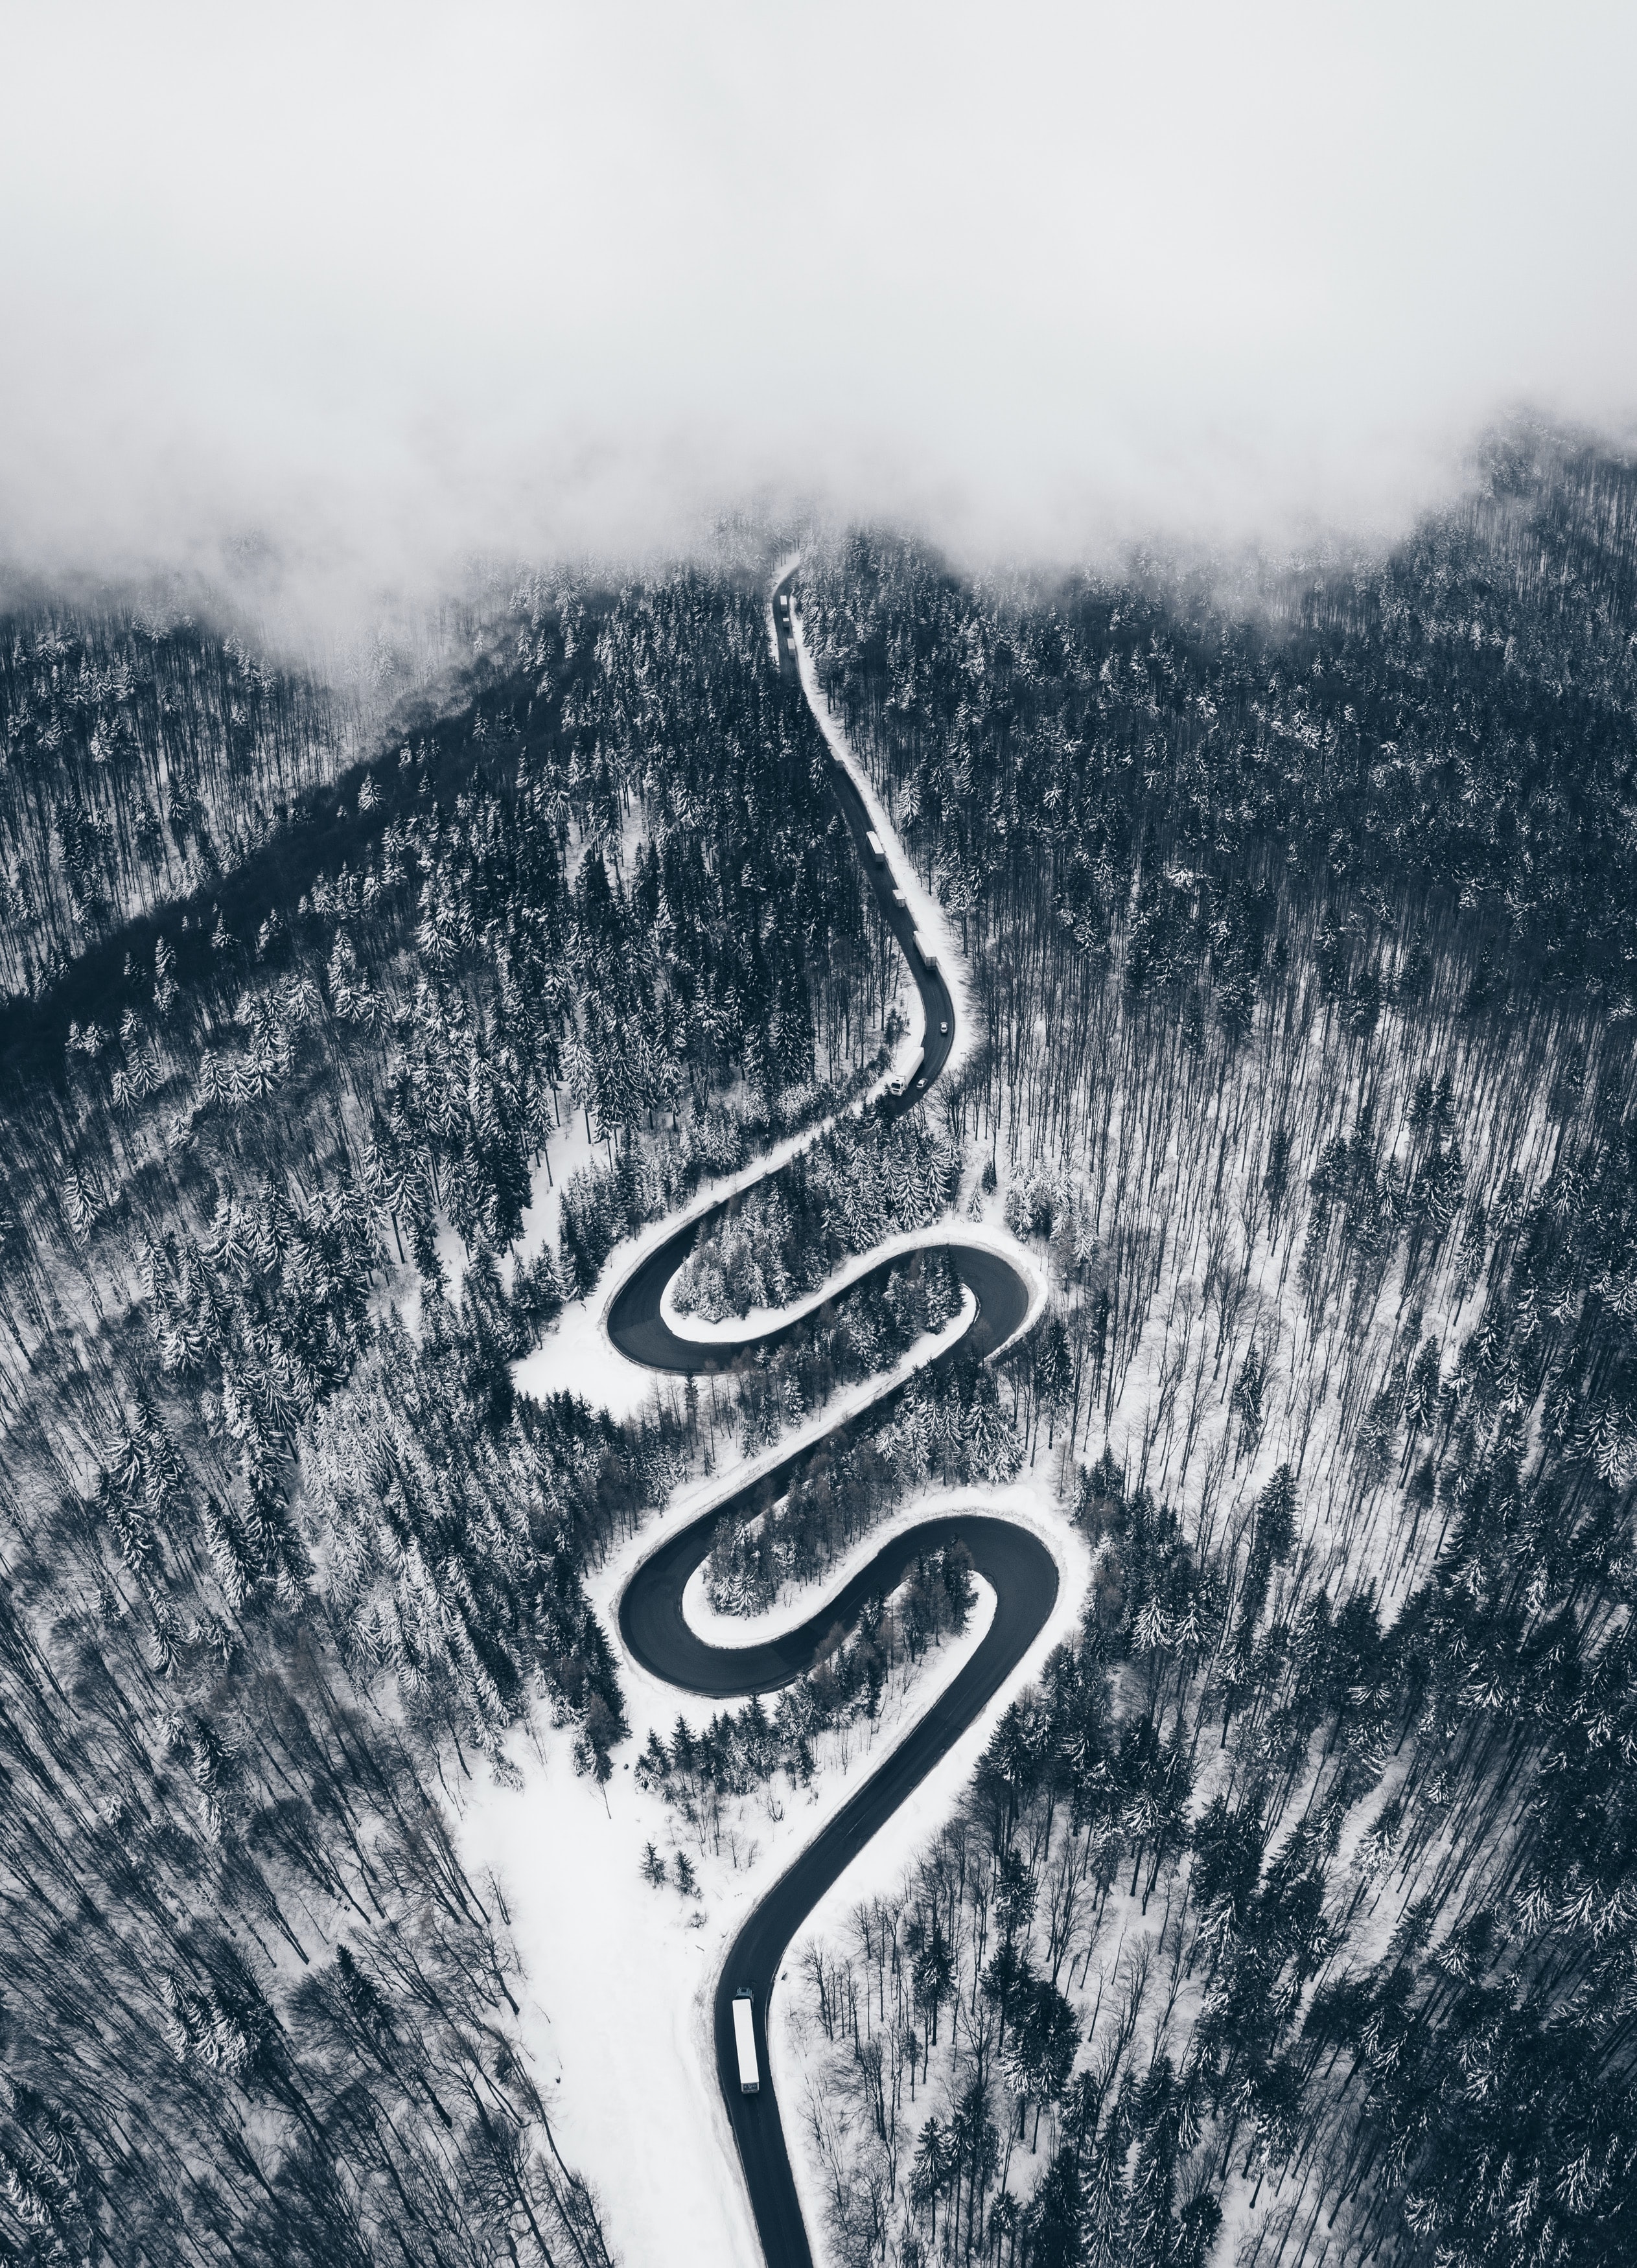 winding, forest, nature, snow, view from above, road, sinuous wallpaper for mobile